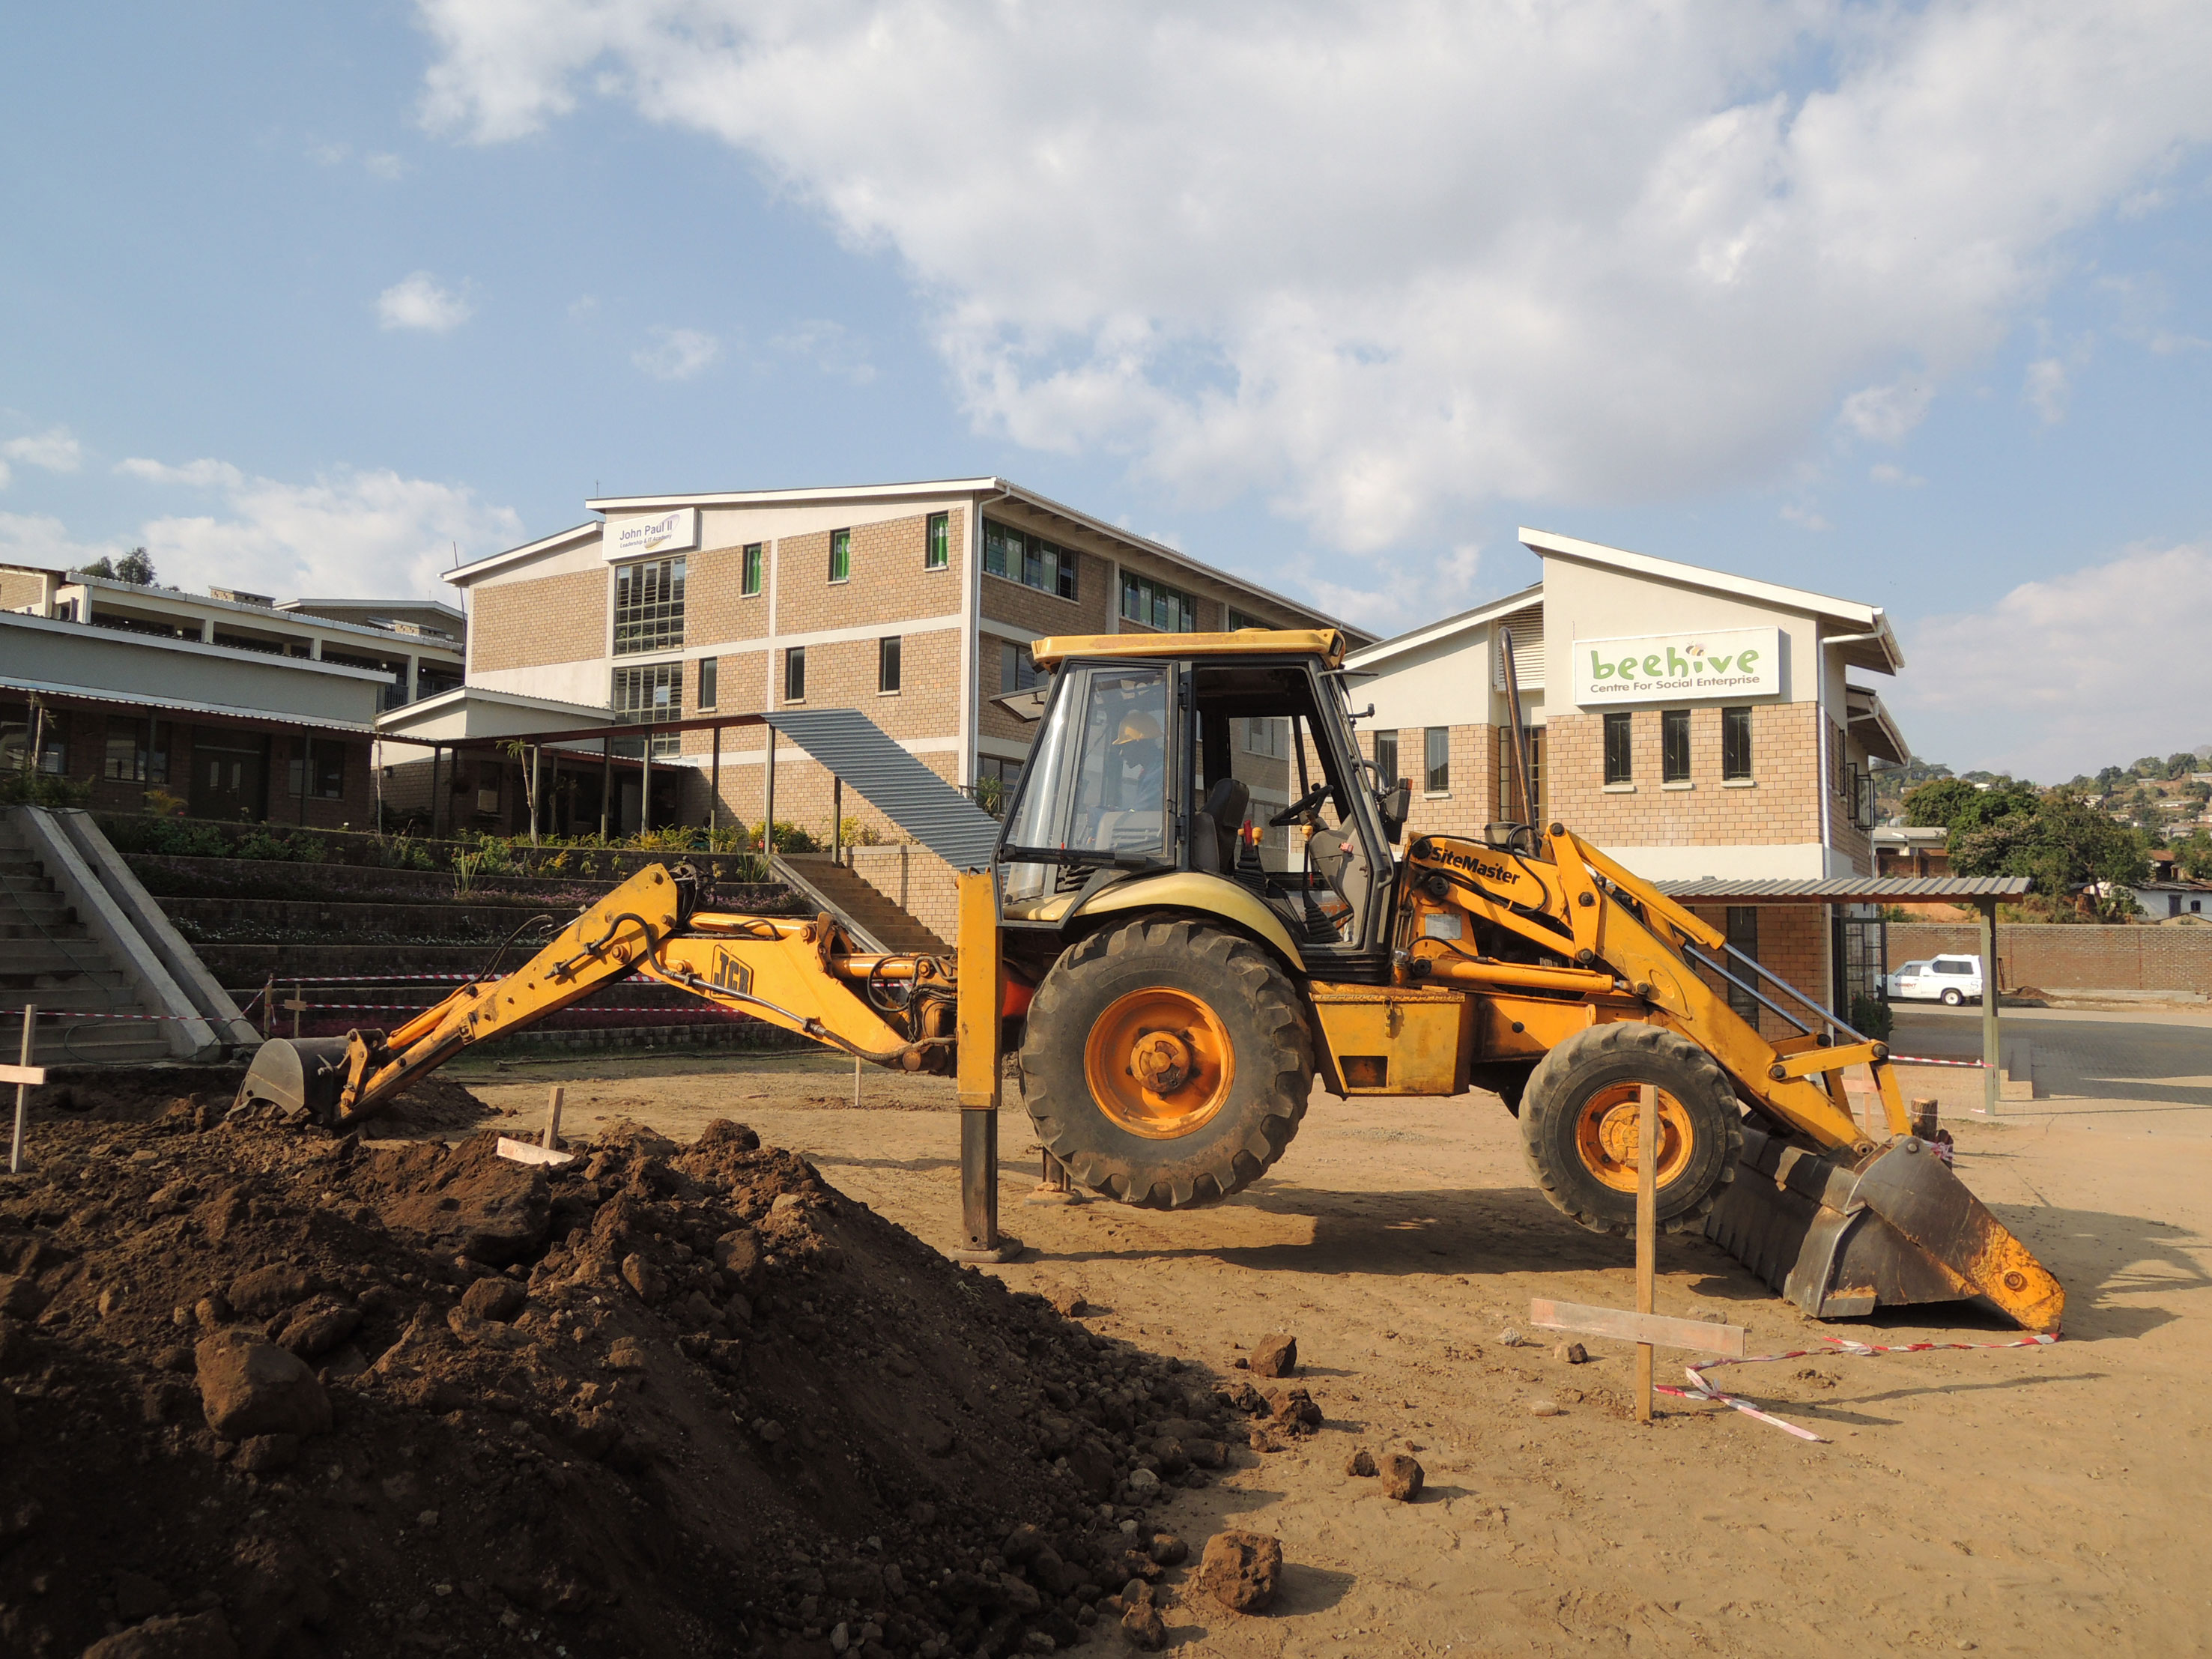 Ongoing work at Beehive campus